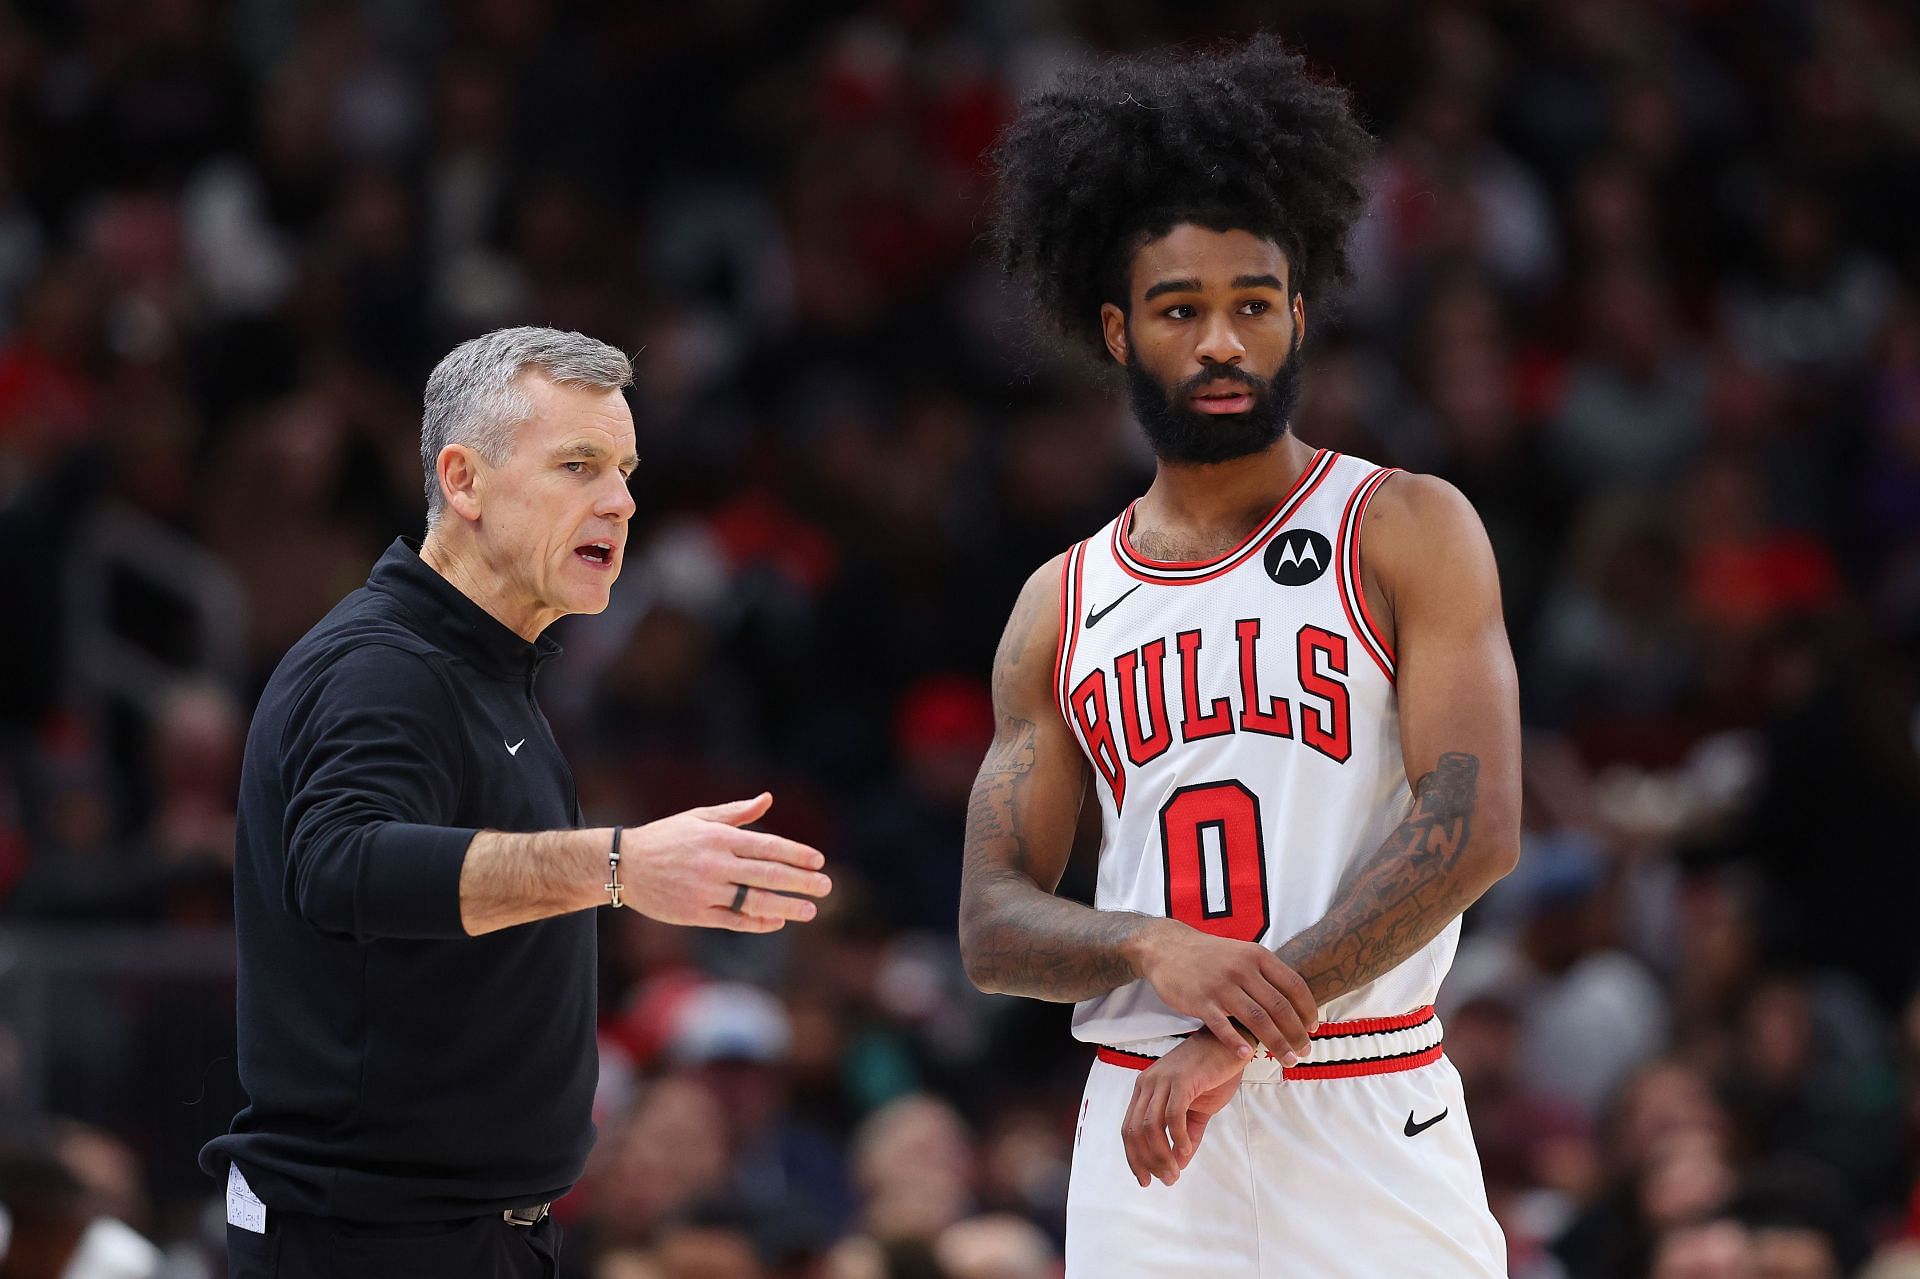 Chicago Bulls coach Billy Donovan talks to guard Coby White.